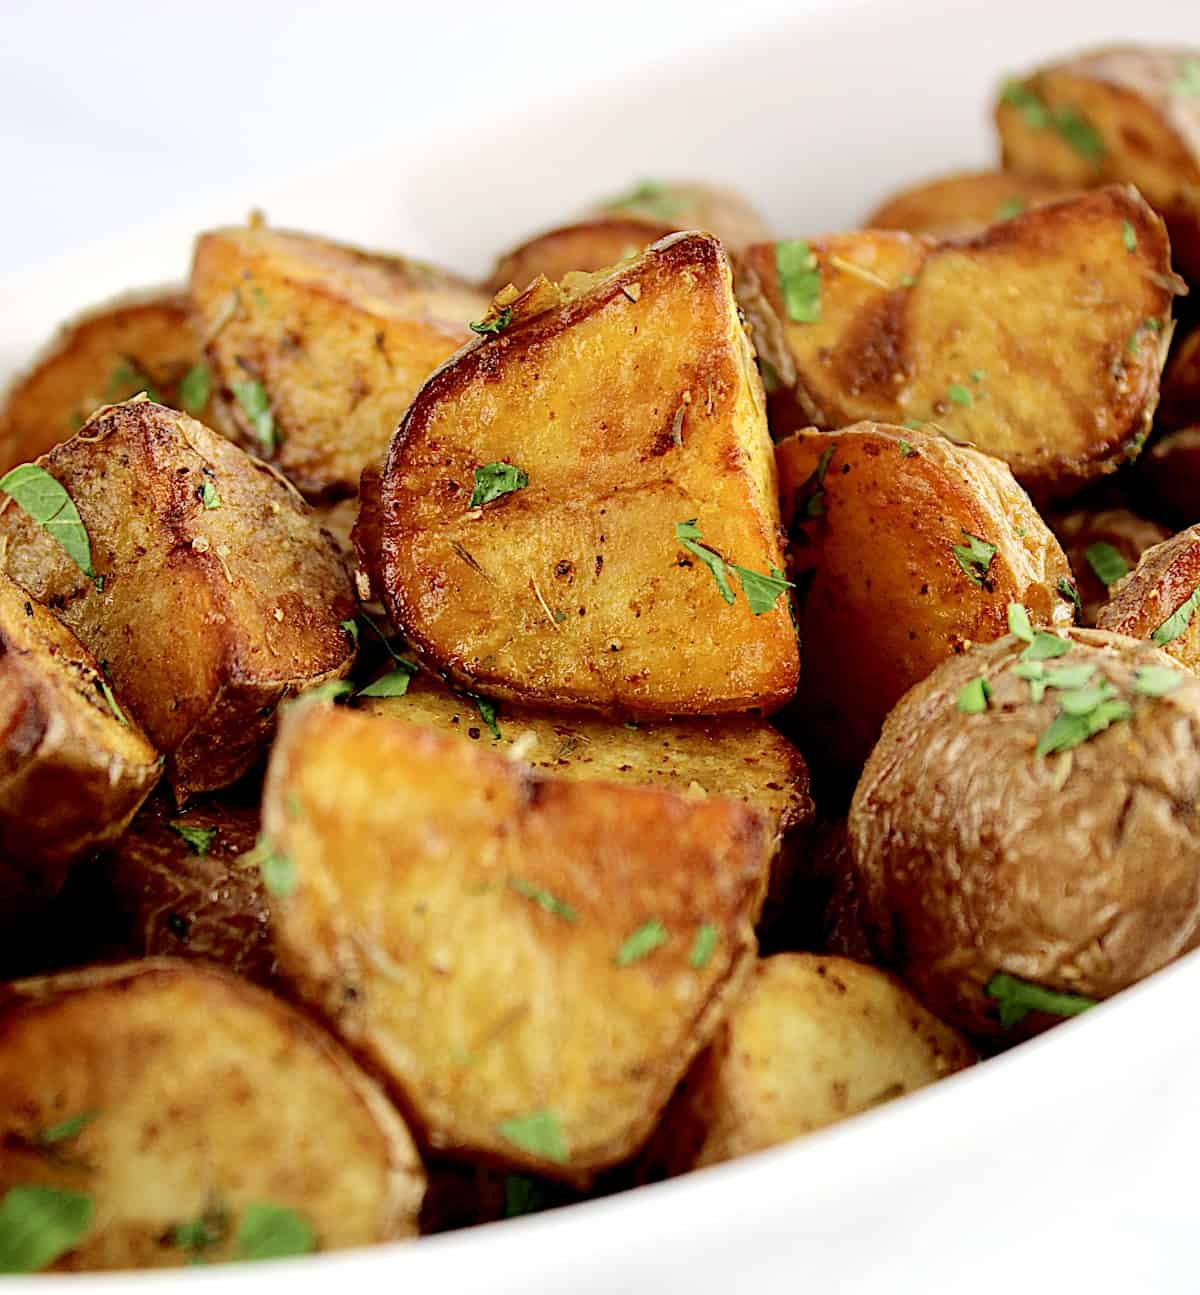 roasted potatoes inn white bowl with chopped parsley